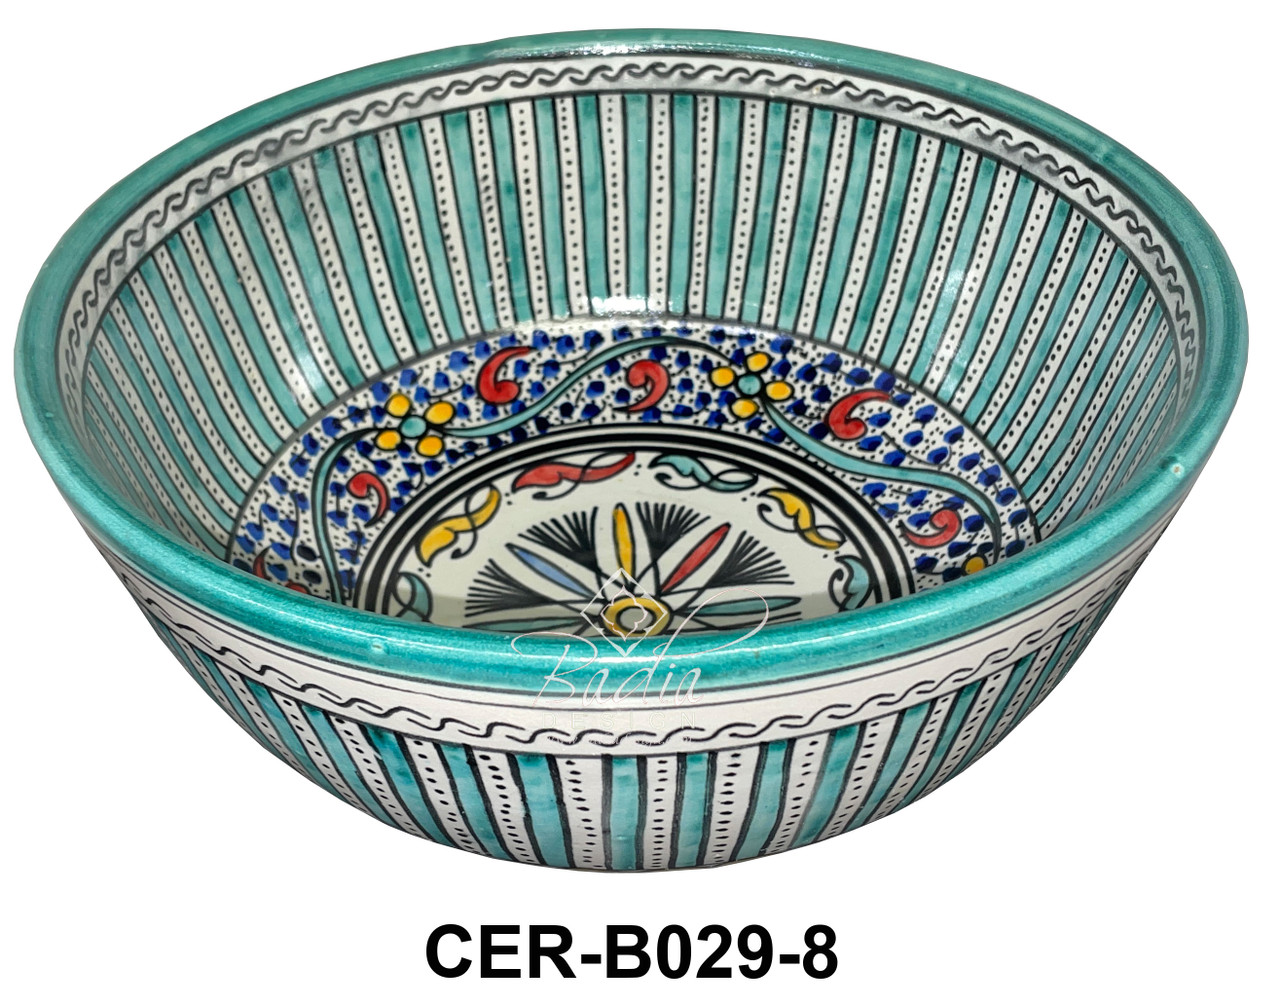 11 1/2 Inch Wide Multi-Color Hand Painted Ceramic Bowls - CER-B029